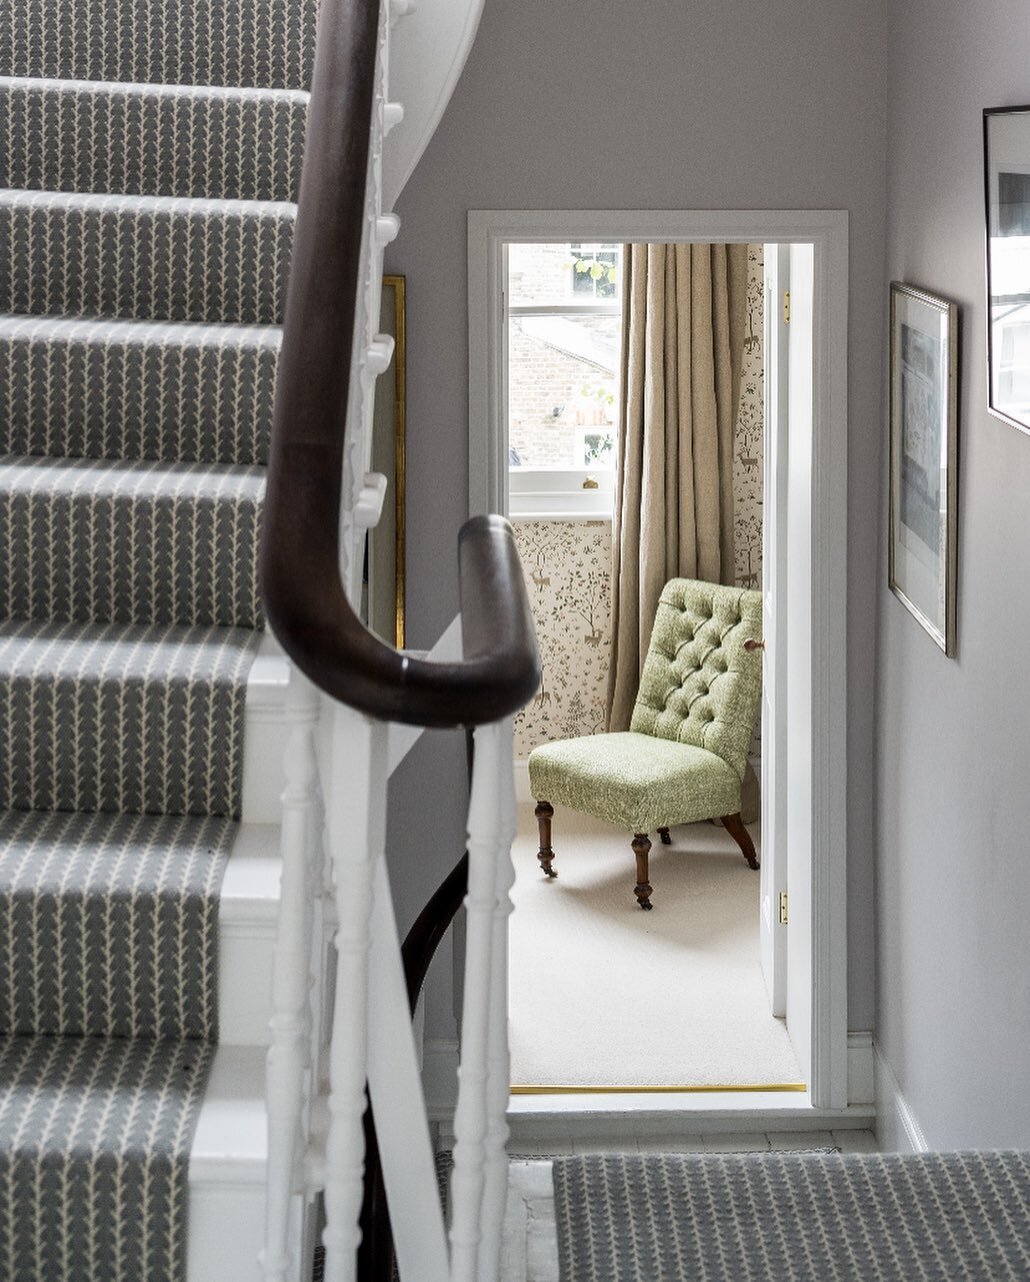 New Work 💫 Townhouse in Kentish Town. Lovely view from the landing through to the nursery 📷 @frenchandtye 

Stair Runner @fleetwoodfoxcarpets 
Nursery Wallpaper @lewisandwood 
Chair in @fermoie 
Curtains @clothshoplondon